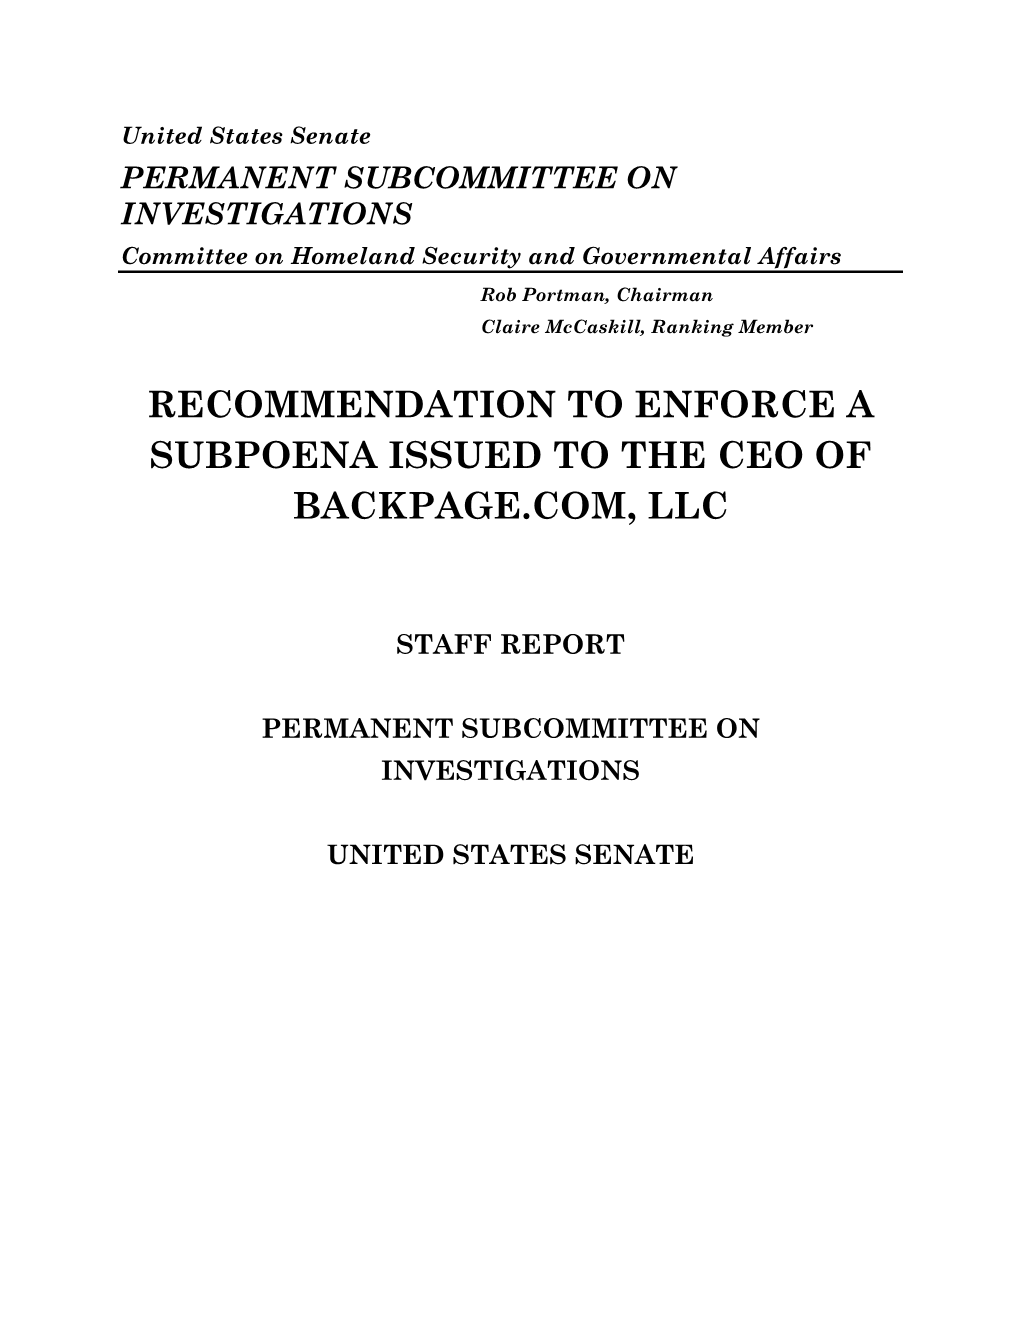 Recommendation to Enforce a Subpoena Issued to the Ceo of Backpage.Com, Llc